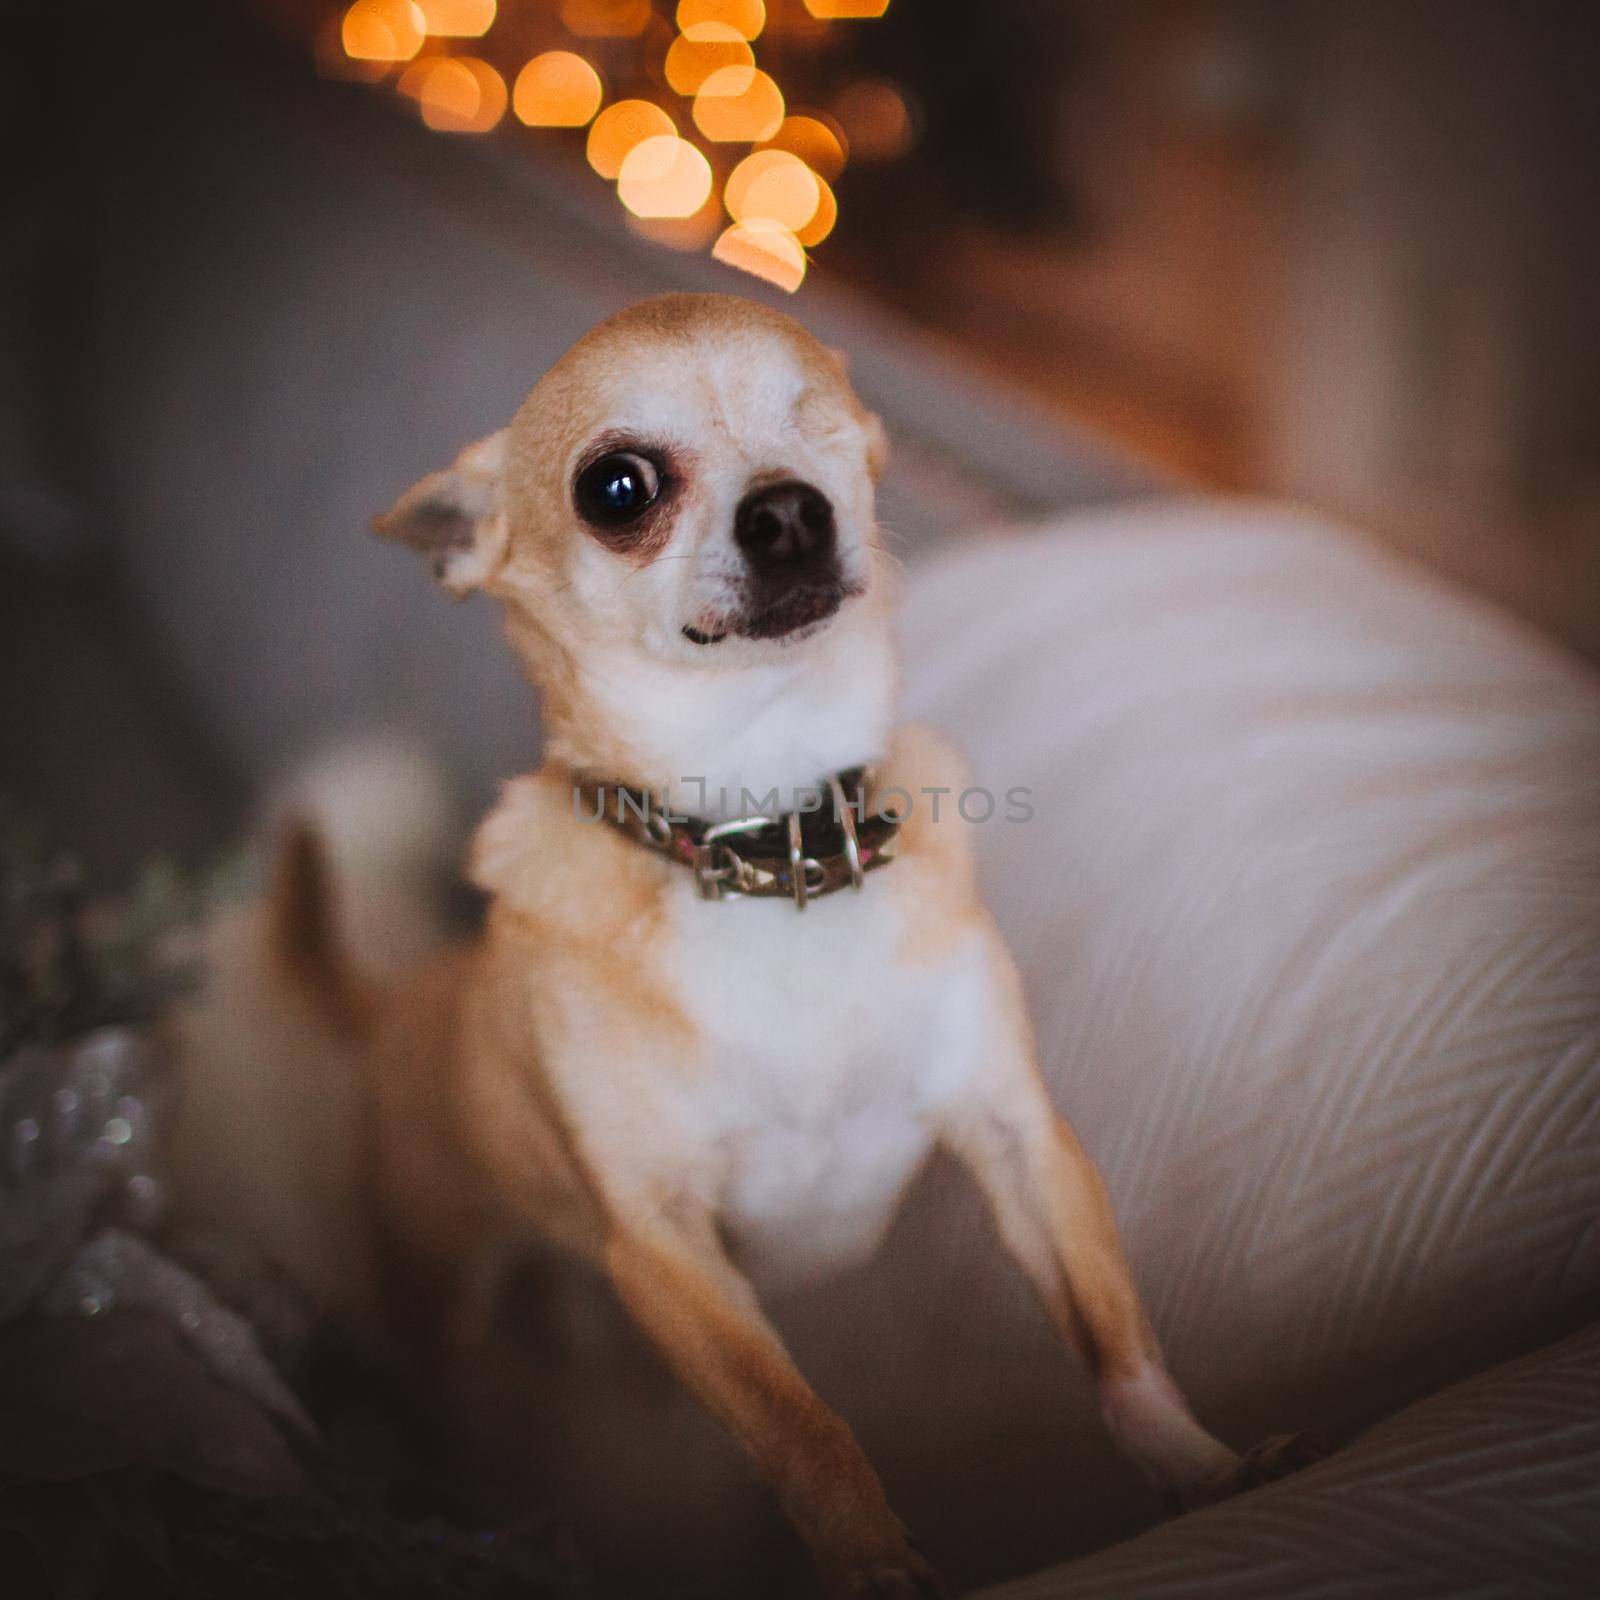 Eyeless Chihuahua dog in festivaly decorated room with Christmass tree. by RosaJay